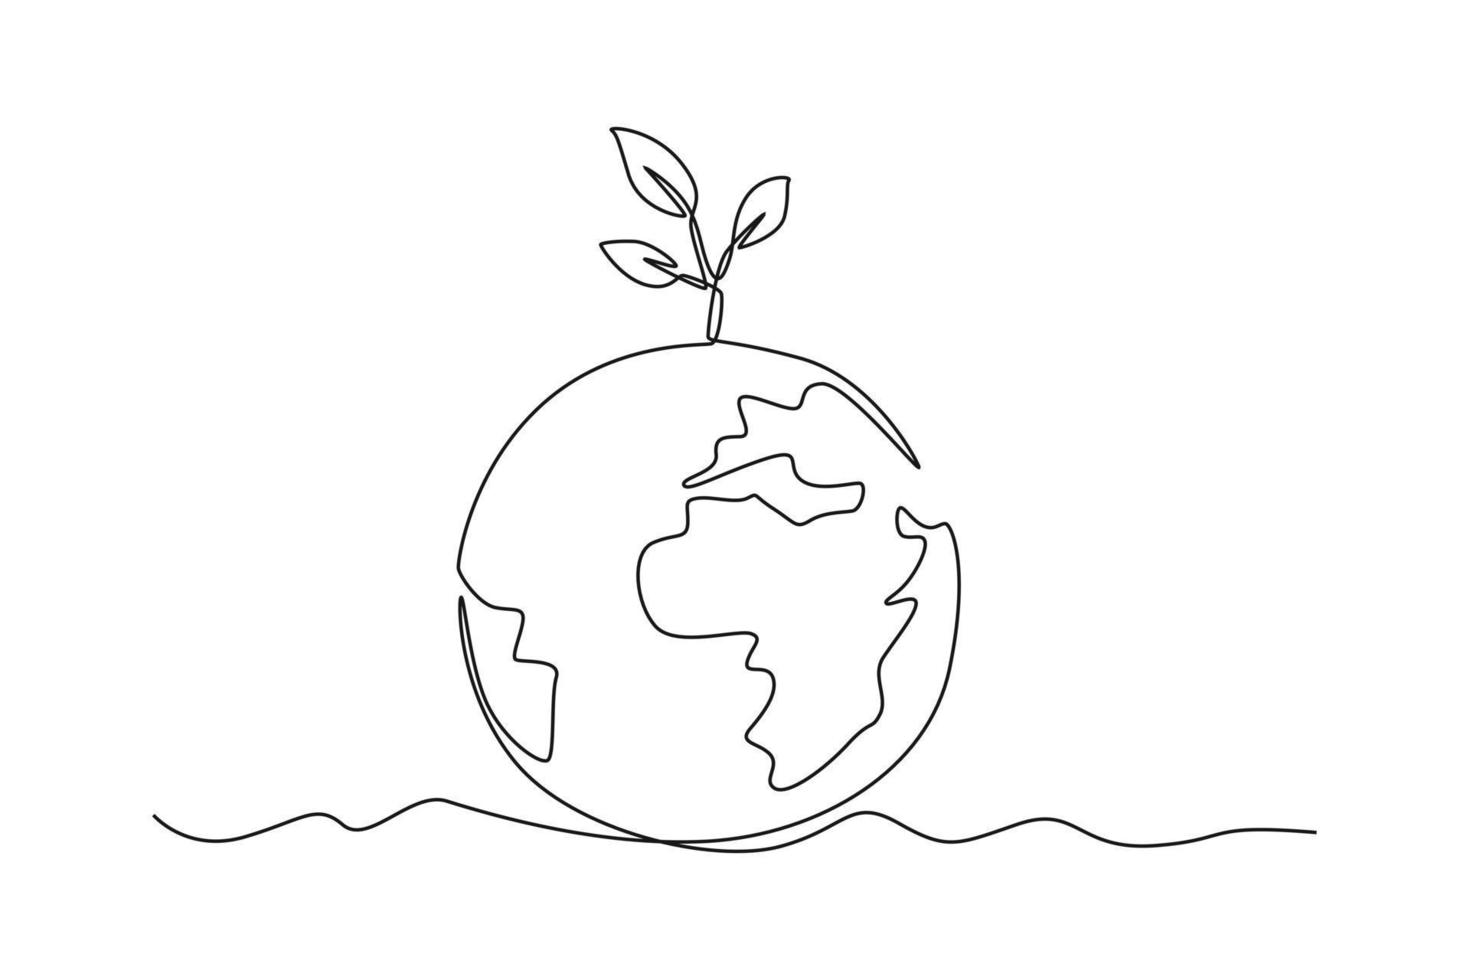 Continuous one line drawing plant seeds grow on the earth. World environment day concept. Single line draw design vector graphic illustration.